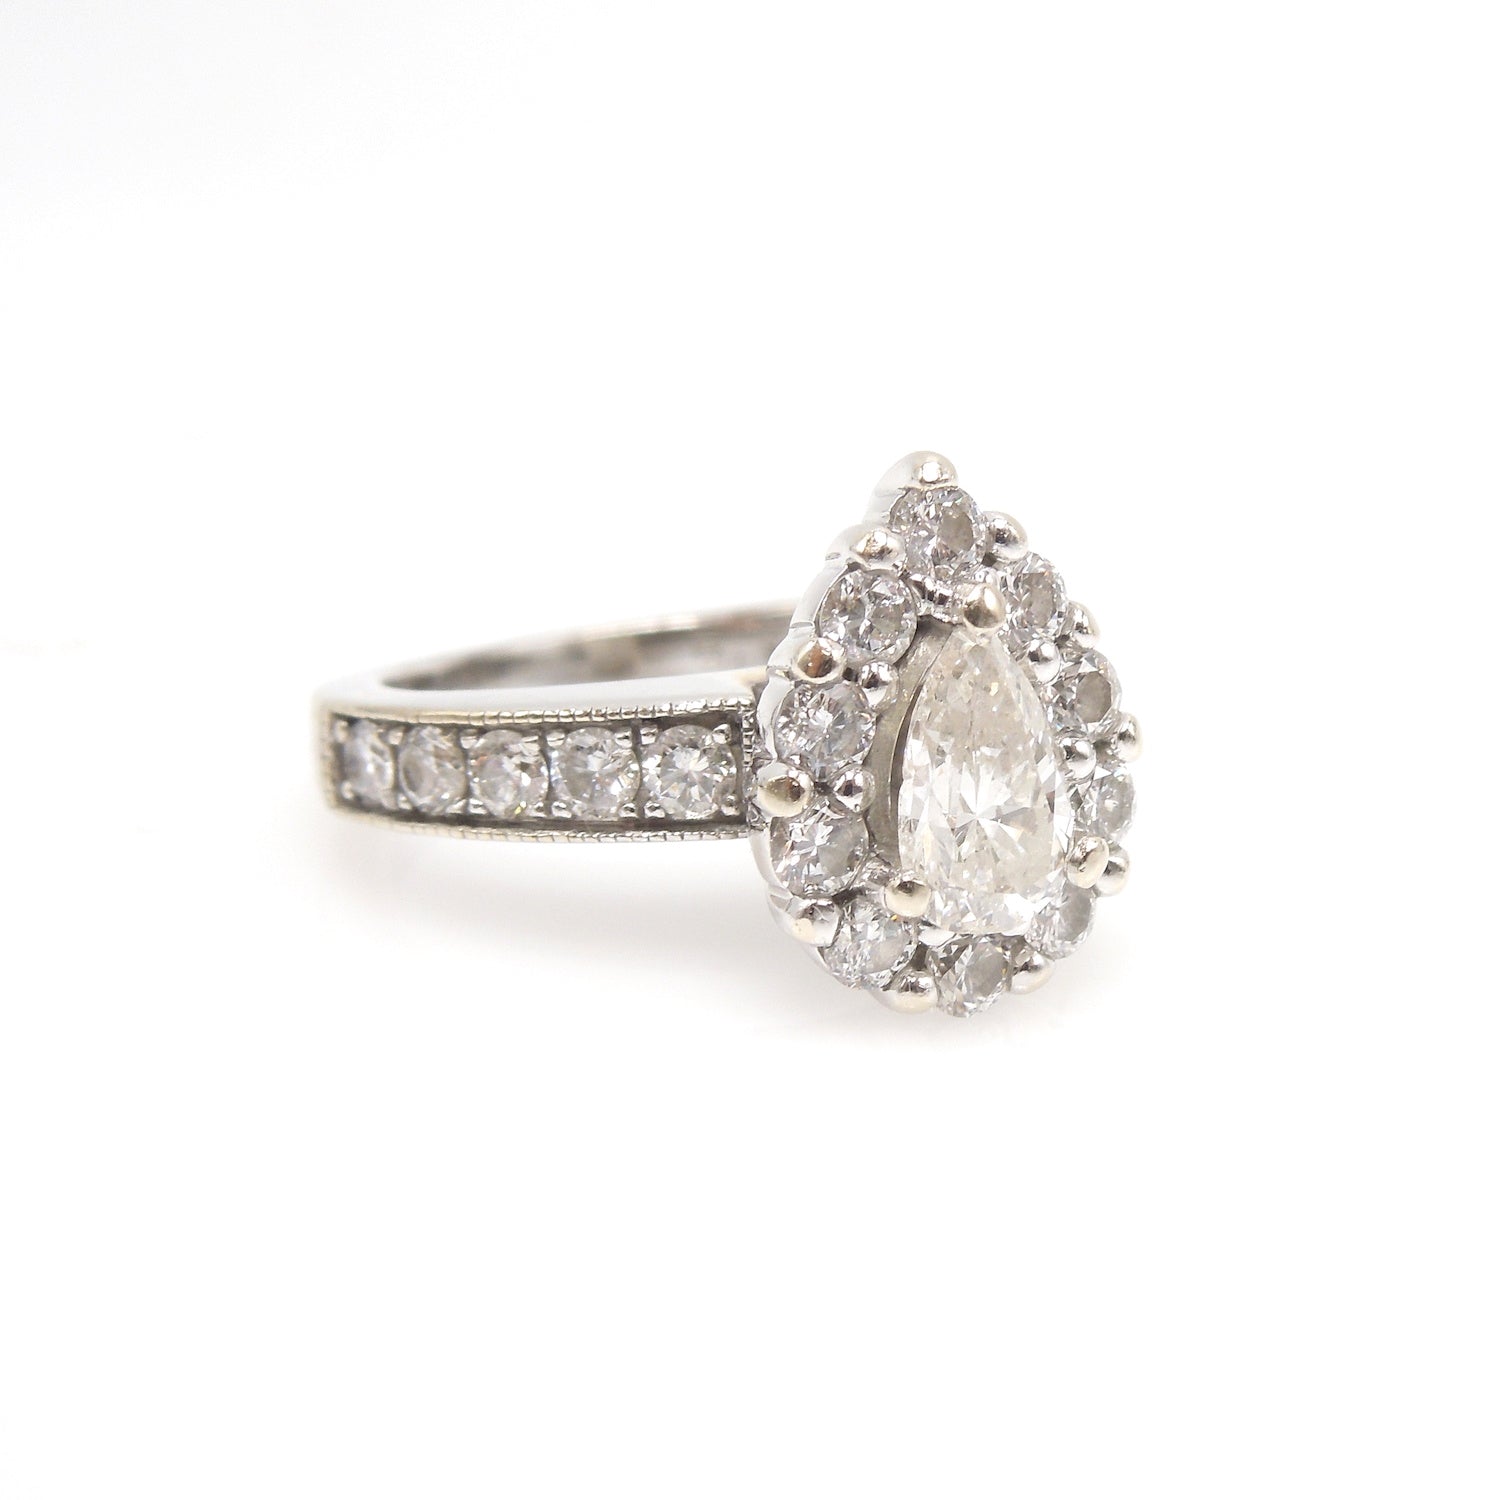 0.61ct Pear Cut Diamond in White Gold with Diamond Halo